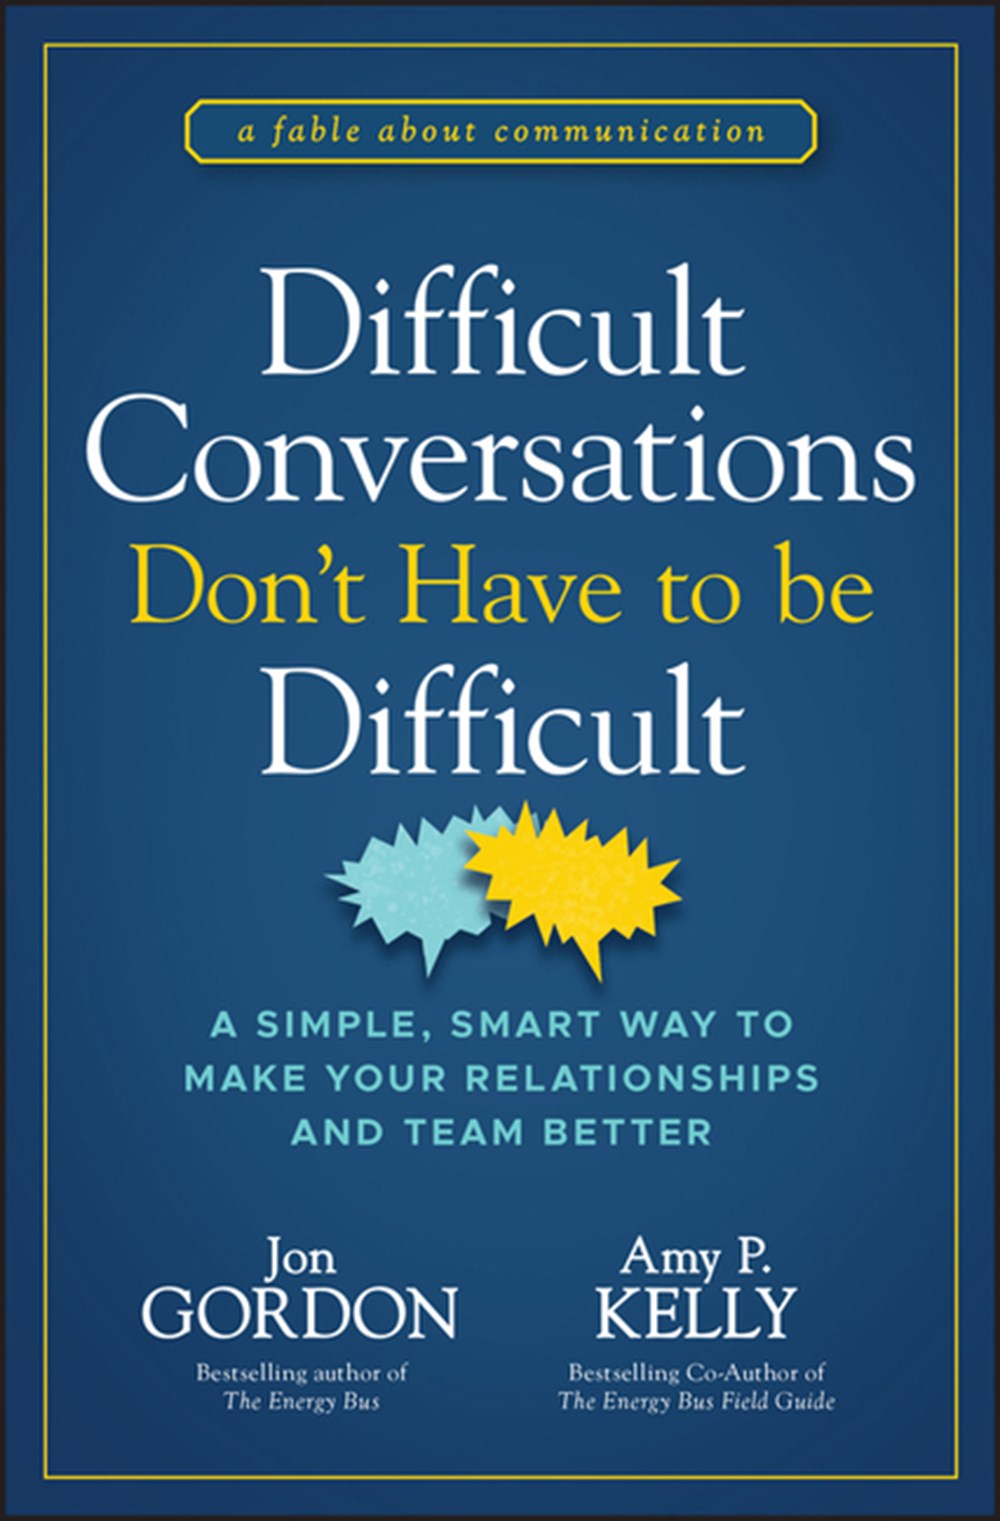 Difficult Conversations Don't Have to Be Difficult: A Simple, Smart Way to Make Your Relationships a